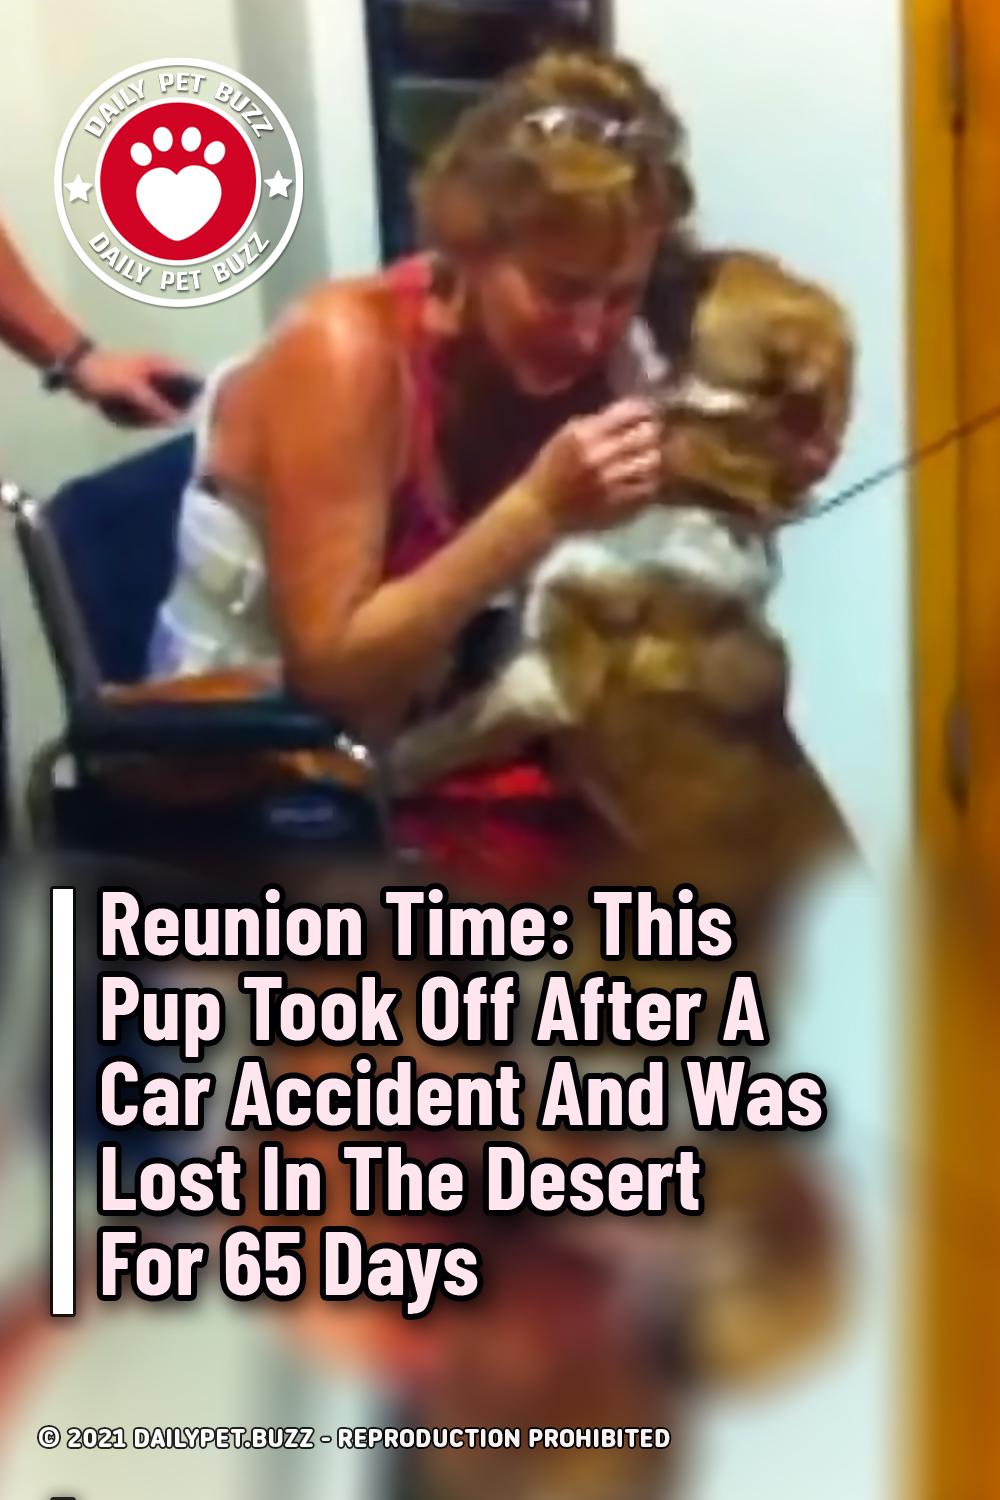 Reunion Time: This Pup Took Off After A Car Accident And Was Lost In The Desert For 65 Days